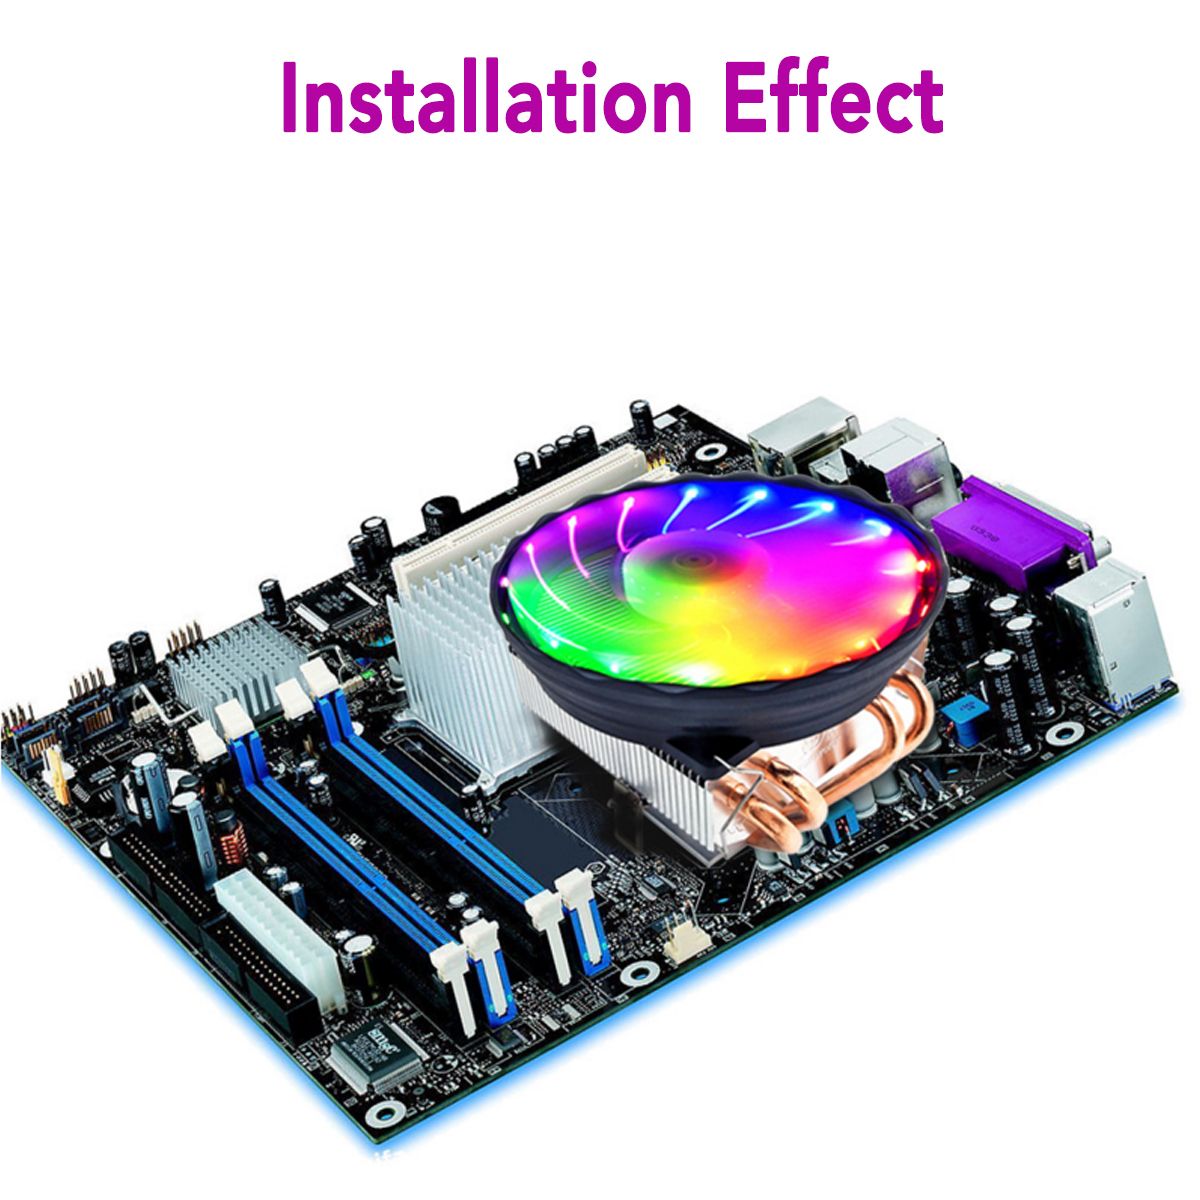 DC-12V-4Pin-Colorful-Backlight-120mm-CPU-Cooling-Fan-PC-Heatsink-for-IntelAMD-For-PC-Computer-Case-1430597